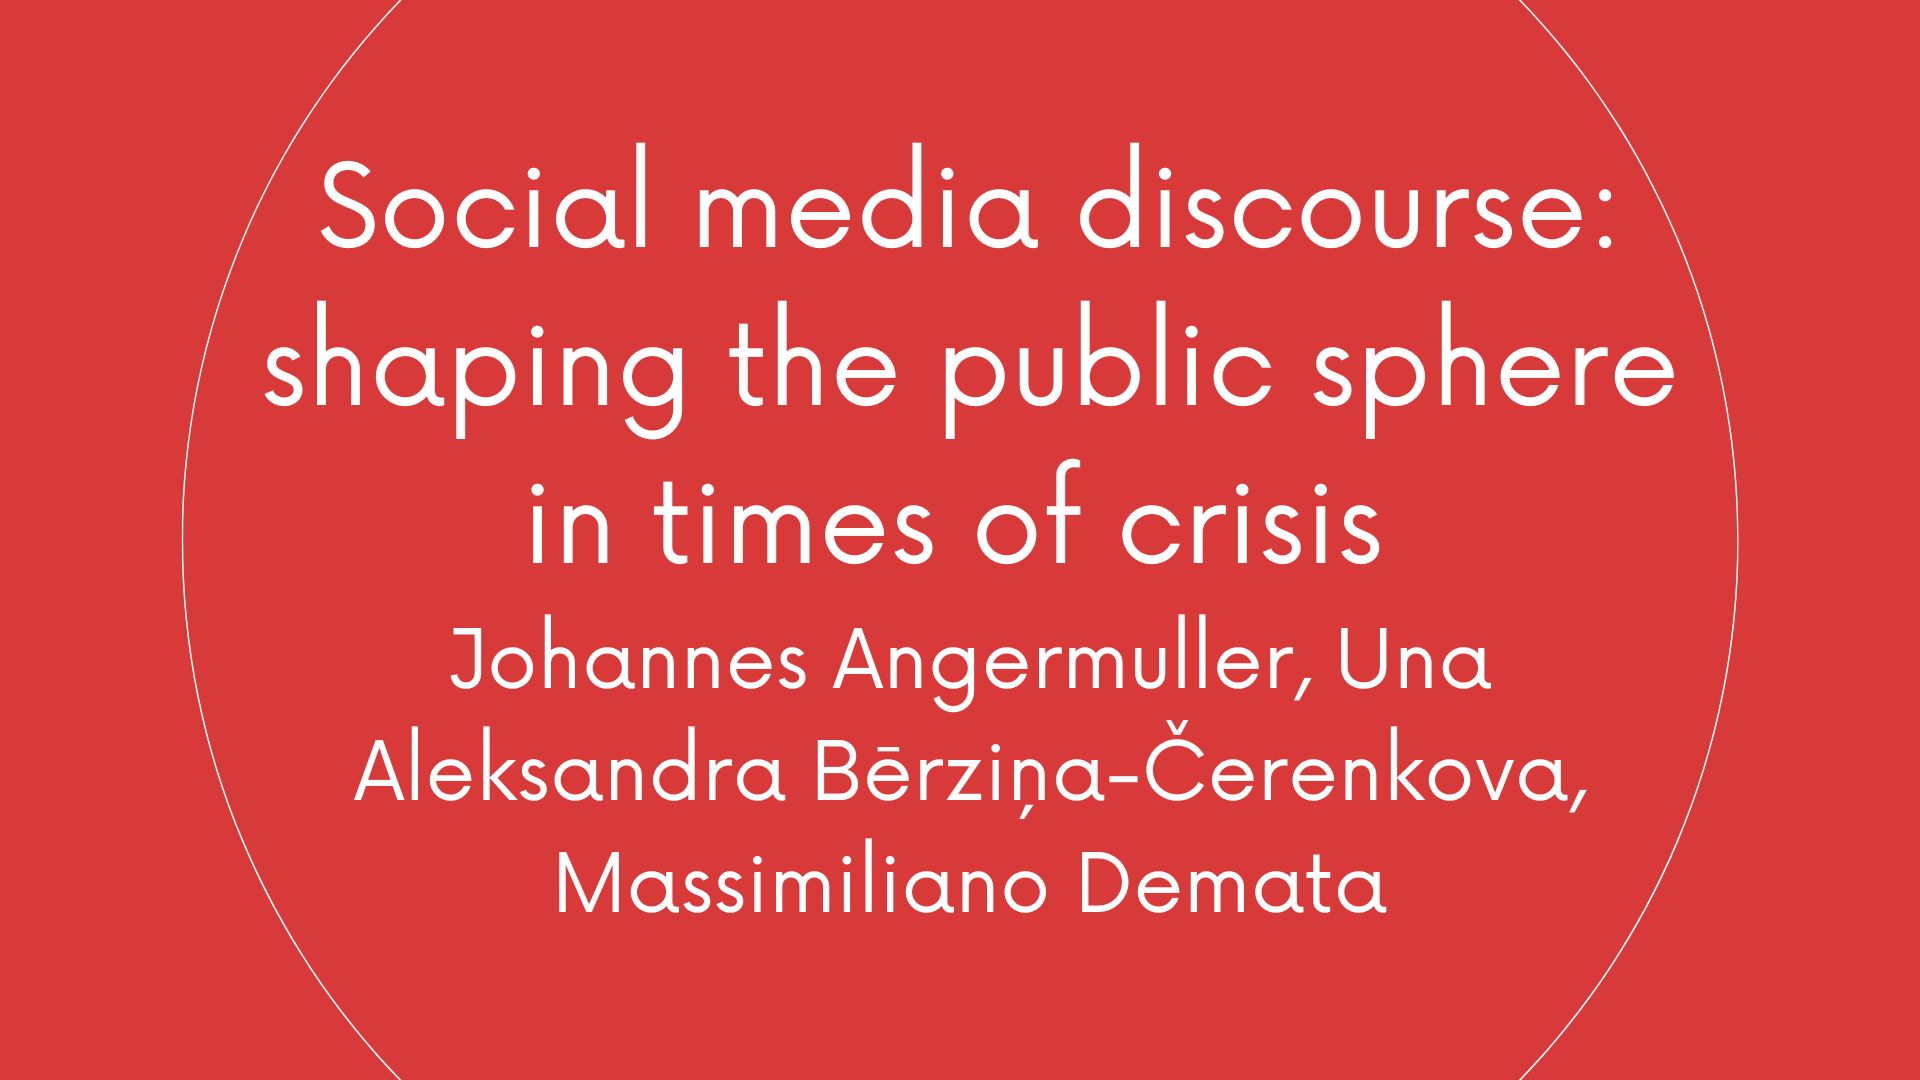 Social media discourse: shaping the public sphere in times of crisis